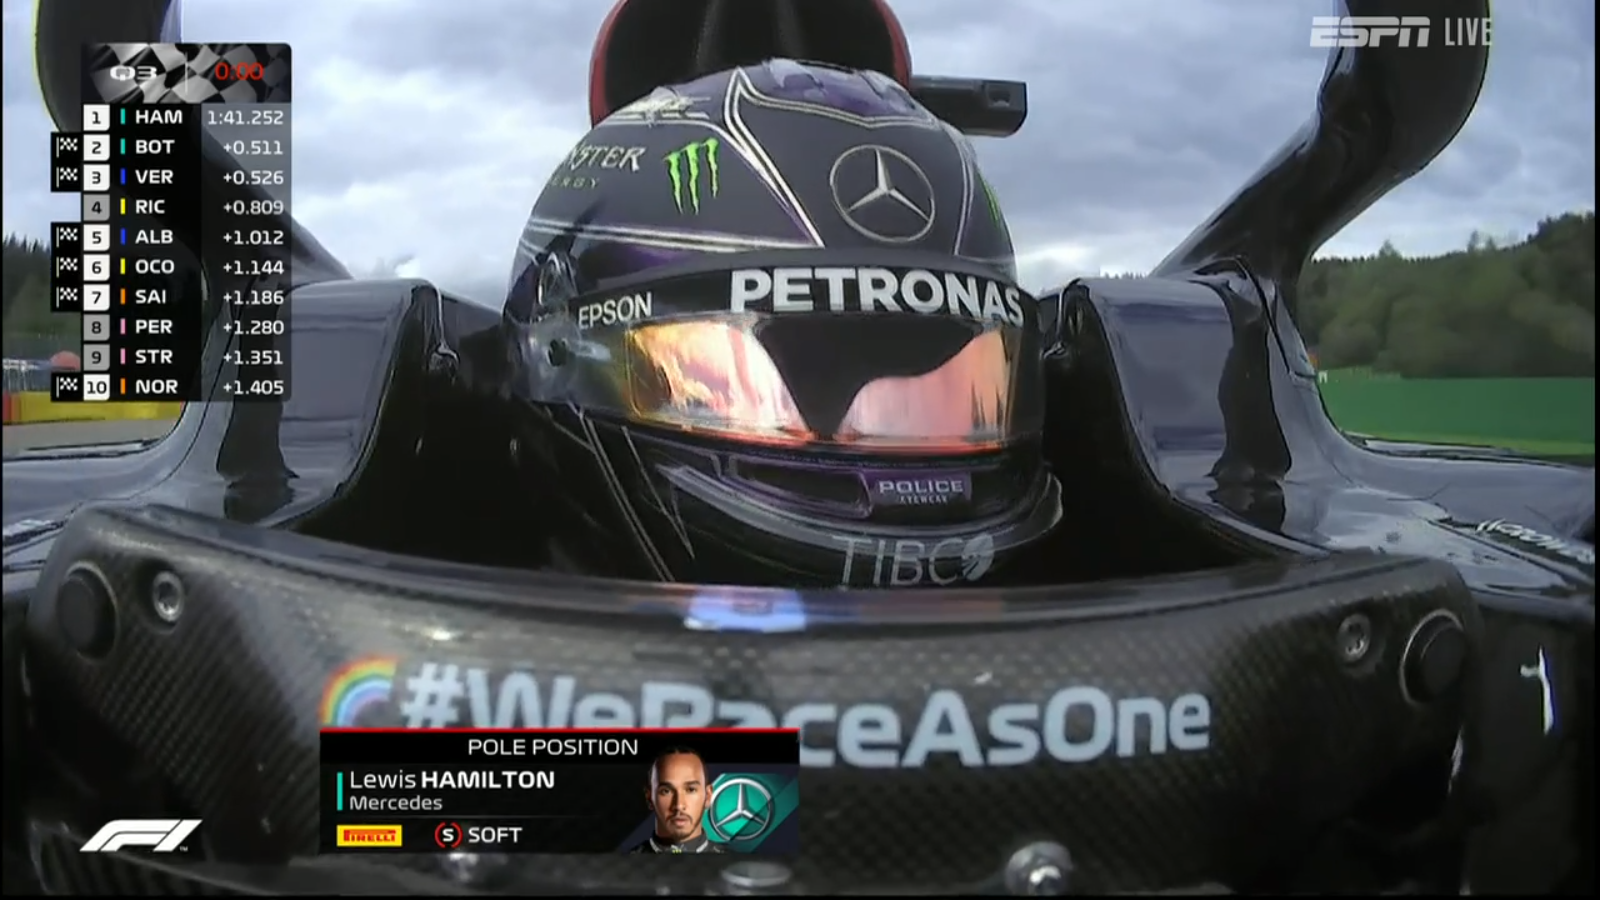 Mercedes AMG's Lewis Hamilton qualifies, with his unbelievable performance (we're actually used to this from Hamilton) to start on Pole for the Belgian Grand Prix 2020.